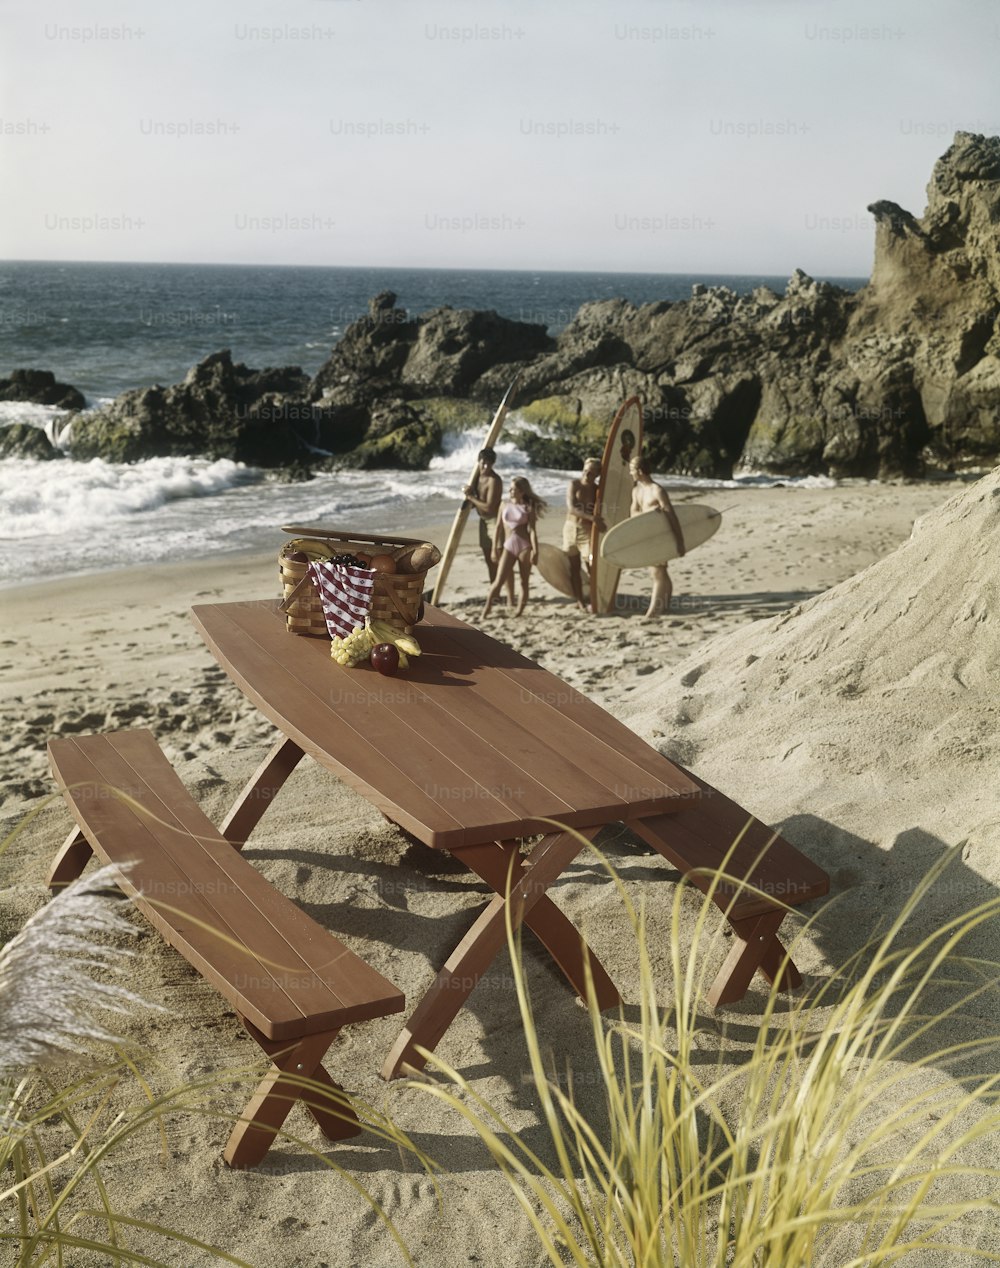 a wooden picnic table on a beach with people in the background